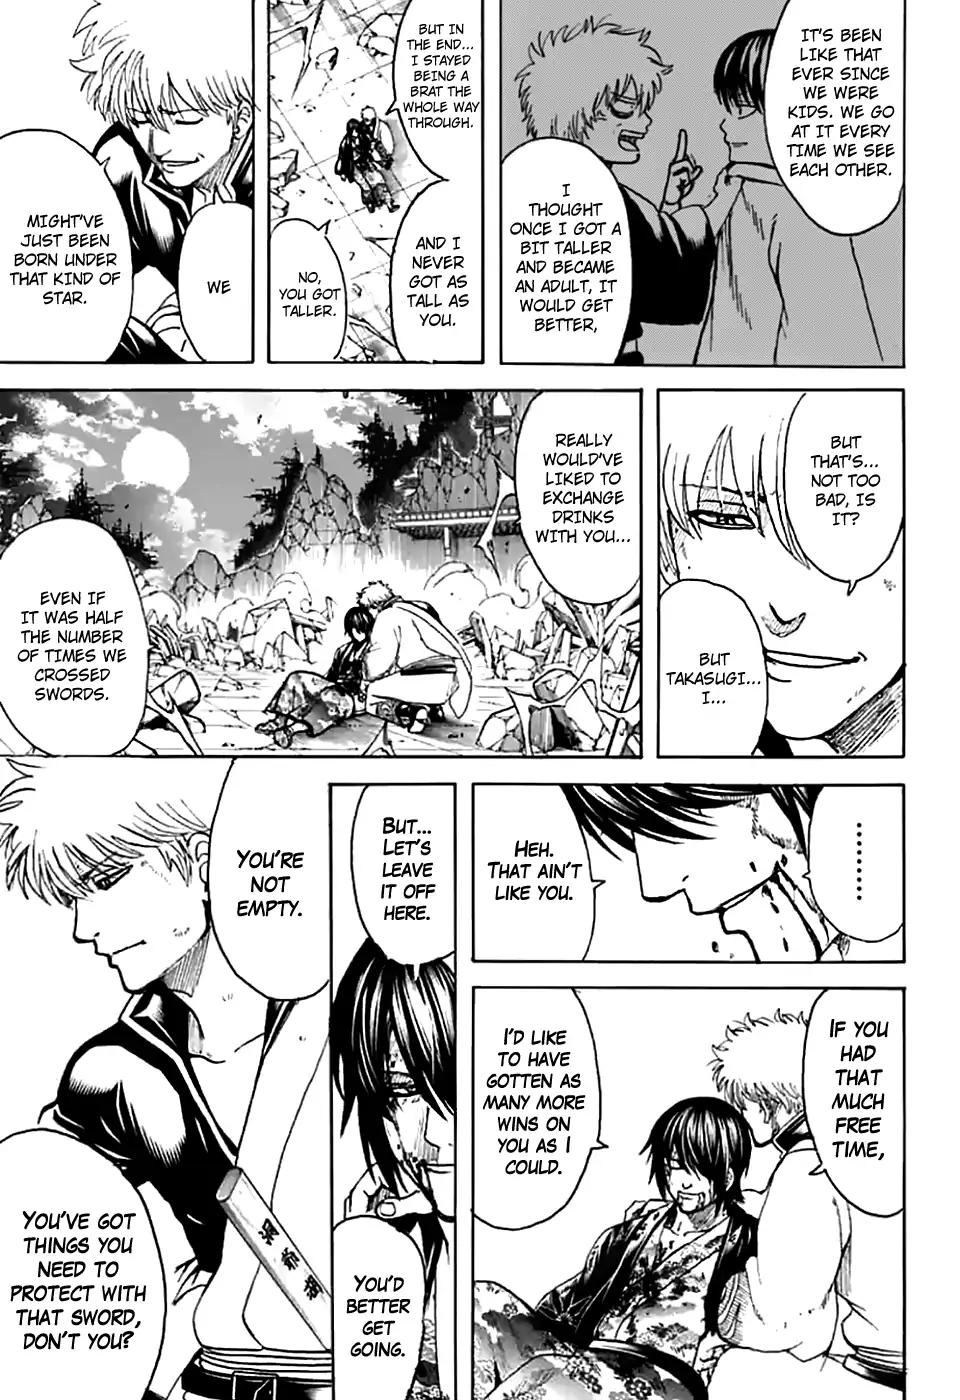 Gintama chapter 703 page 36